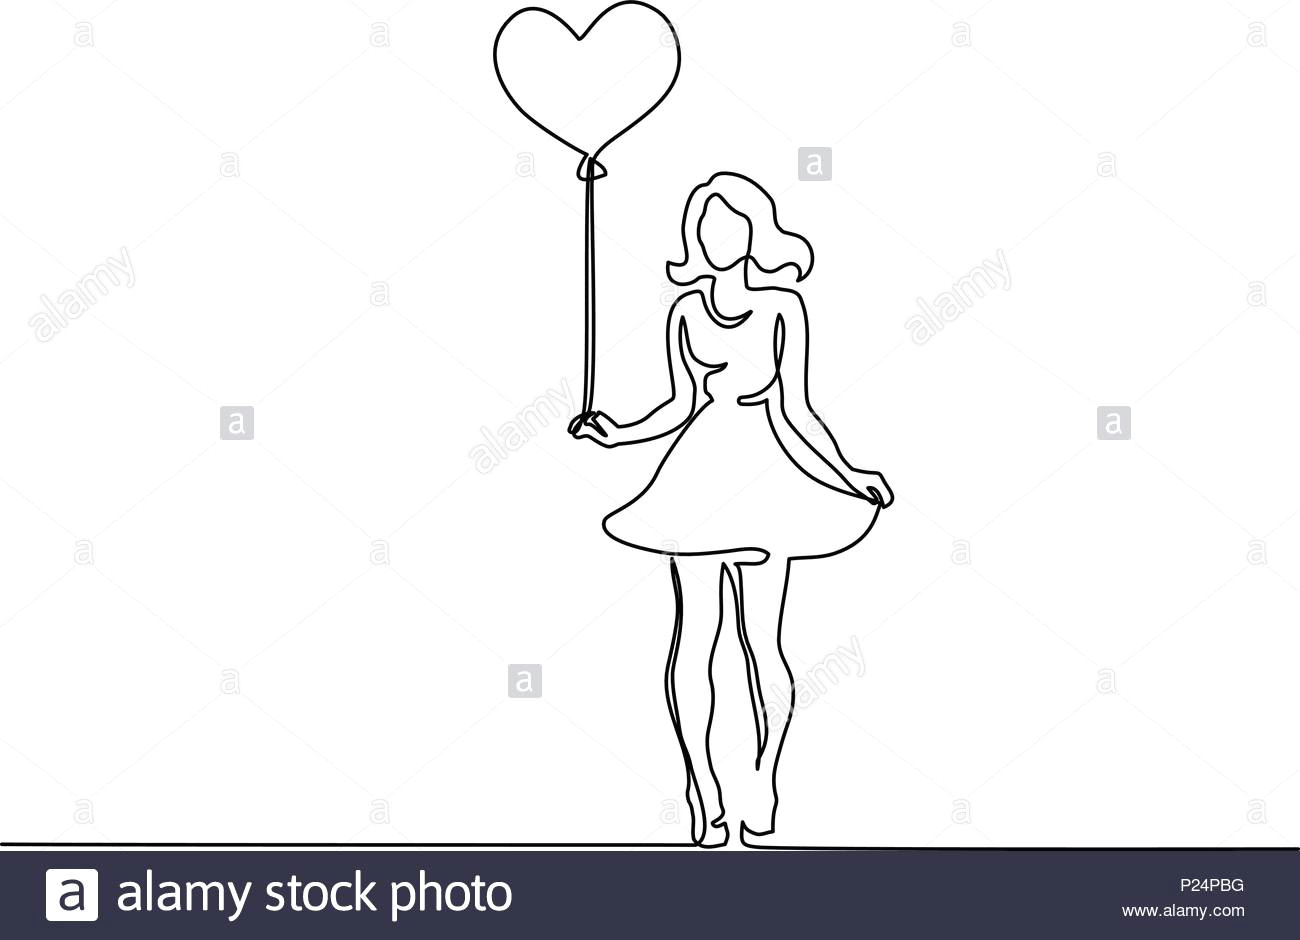 beautiful young woman holding balloon heart stock image